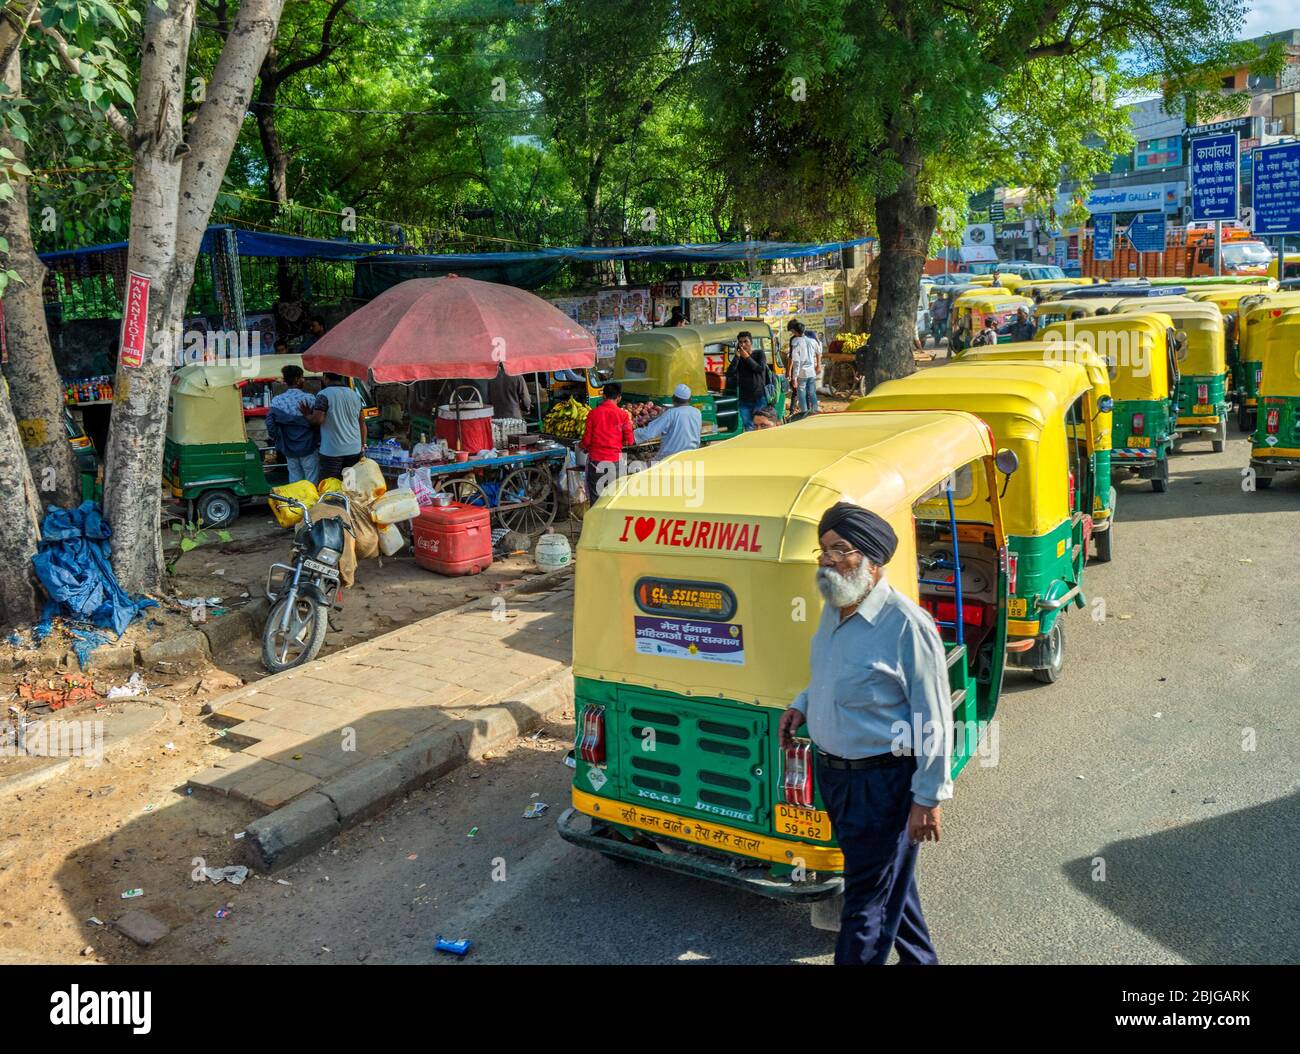 New Delhi / India - September 27, 2019: Sikh man in front of Tuk Tuks in the street in New Delhi, India. Tuk Tuks are painted with I Love Kejriwal slo Stock Photo